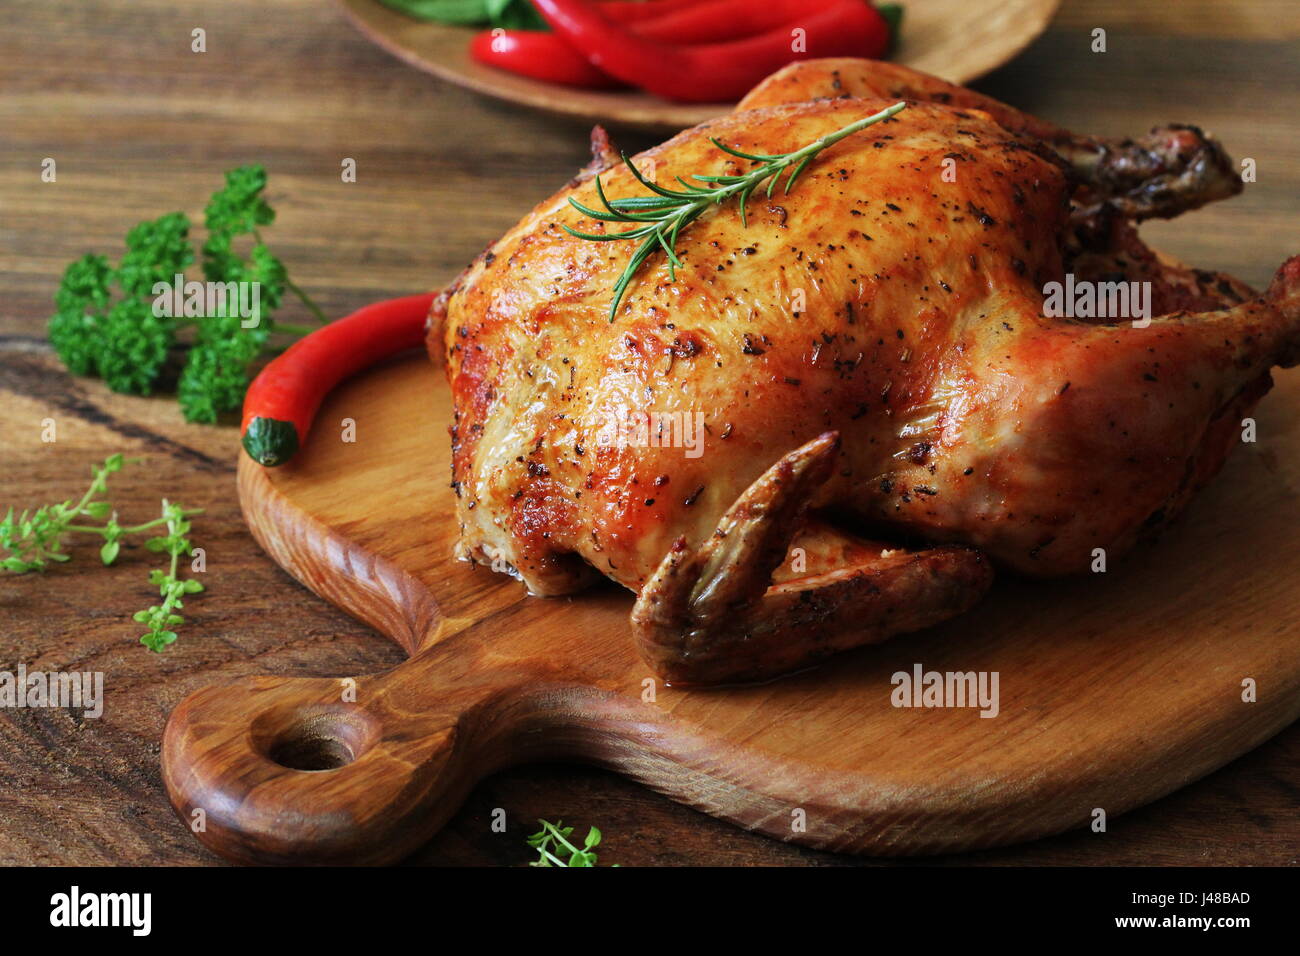 Whole roasted chicken on cutting board Stock Photo